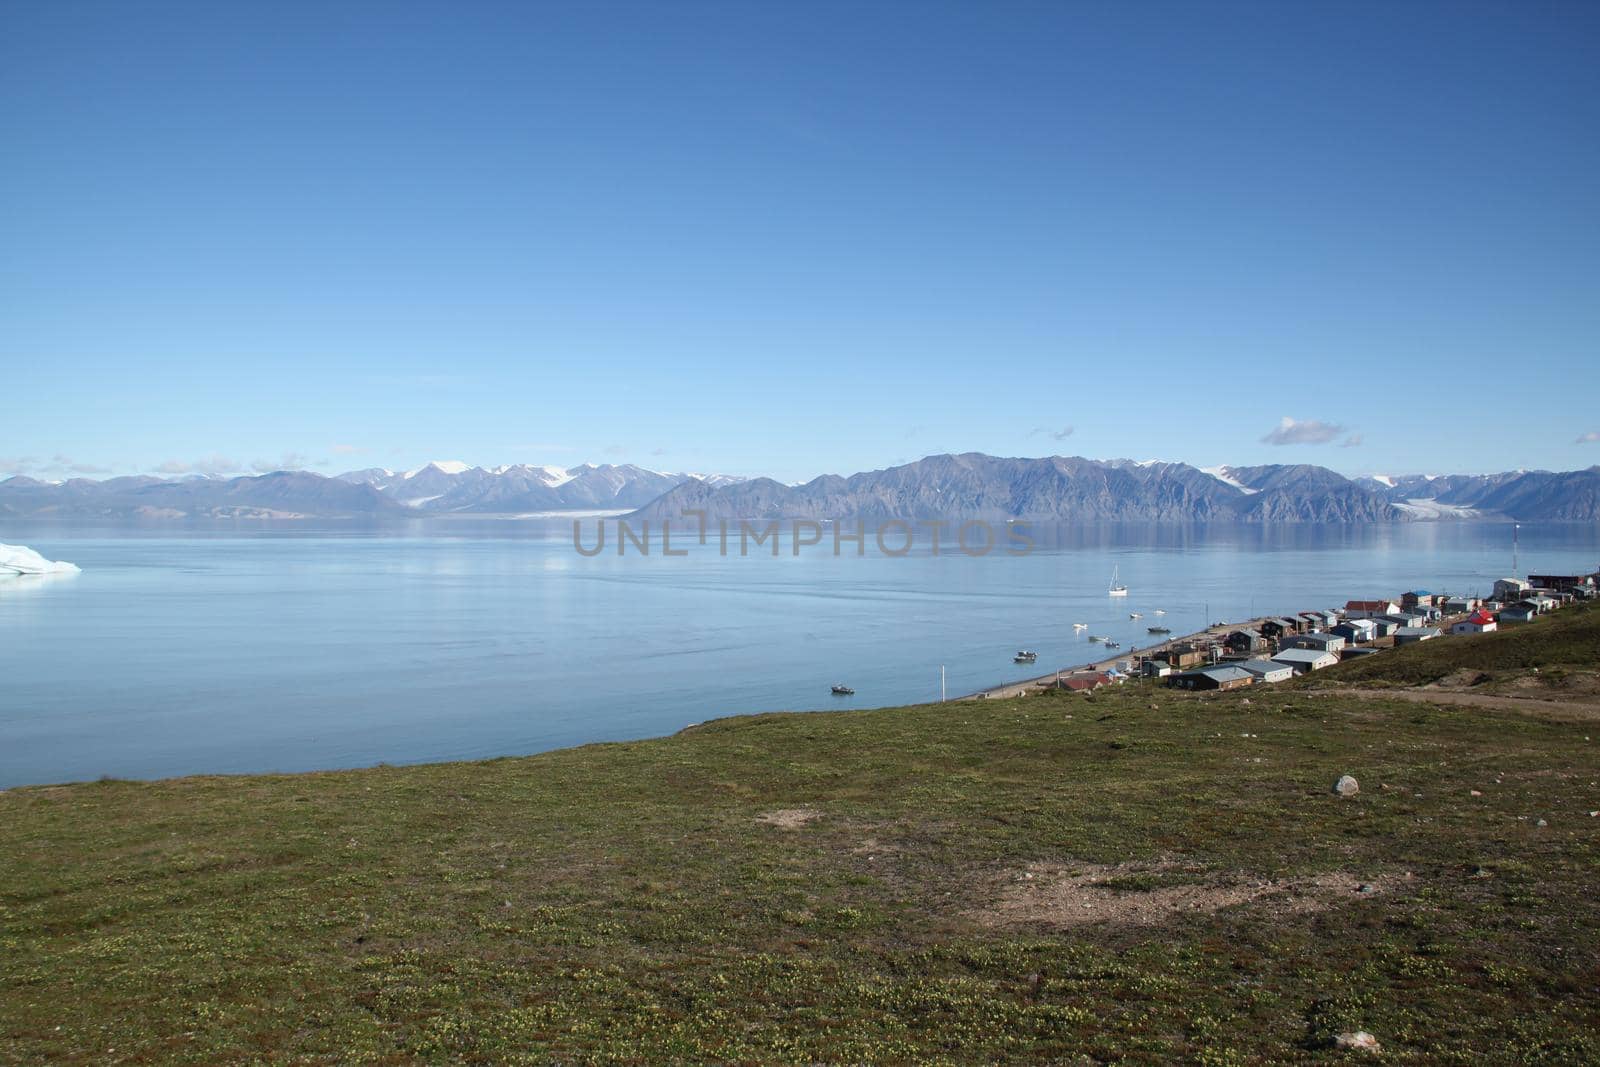 View of the community of Pond Inlet and Lancaster Sound, Northwest Passage, Nunavut by Granchinho